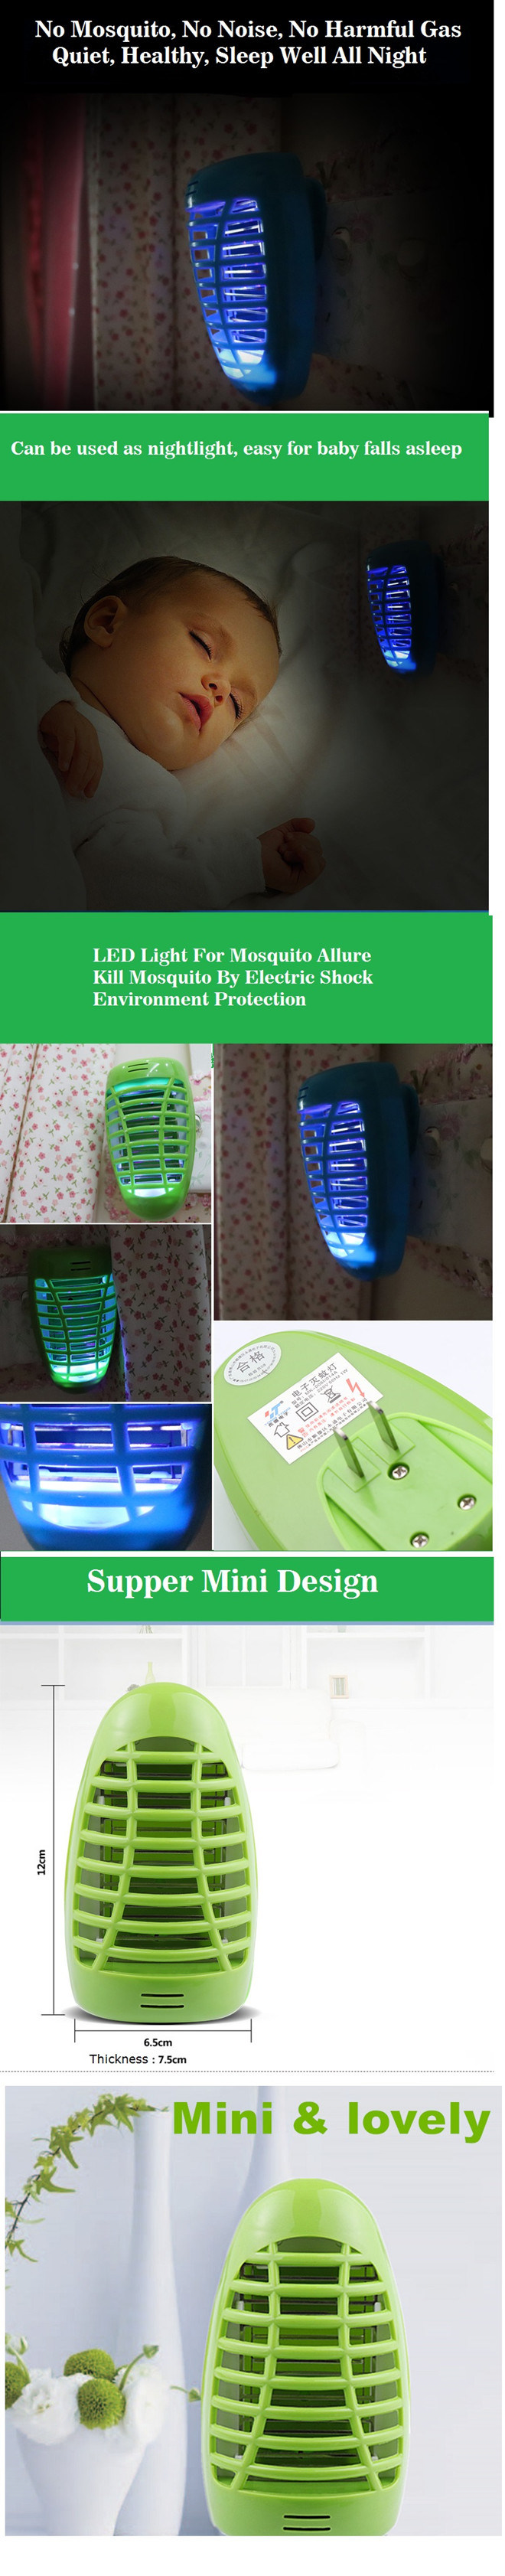 Mini Electric Bug Zapper Insect Mosquito Killer Control Lamp with 1W UV LED